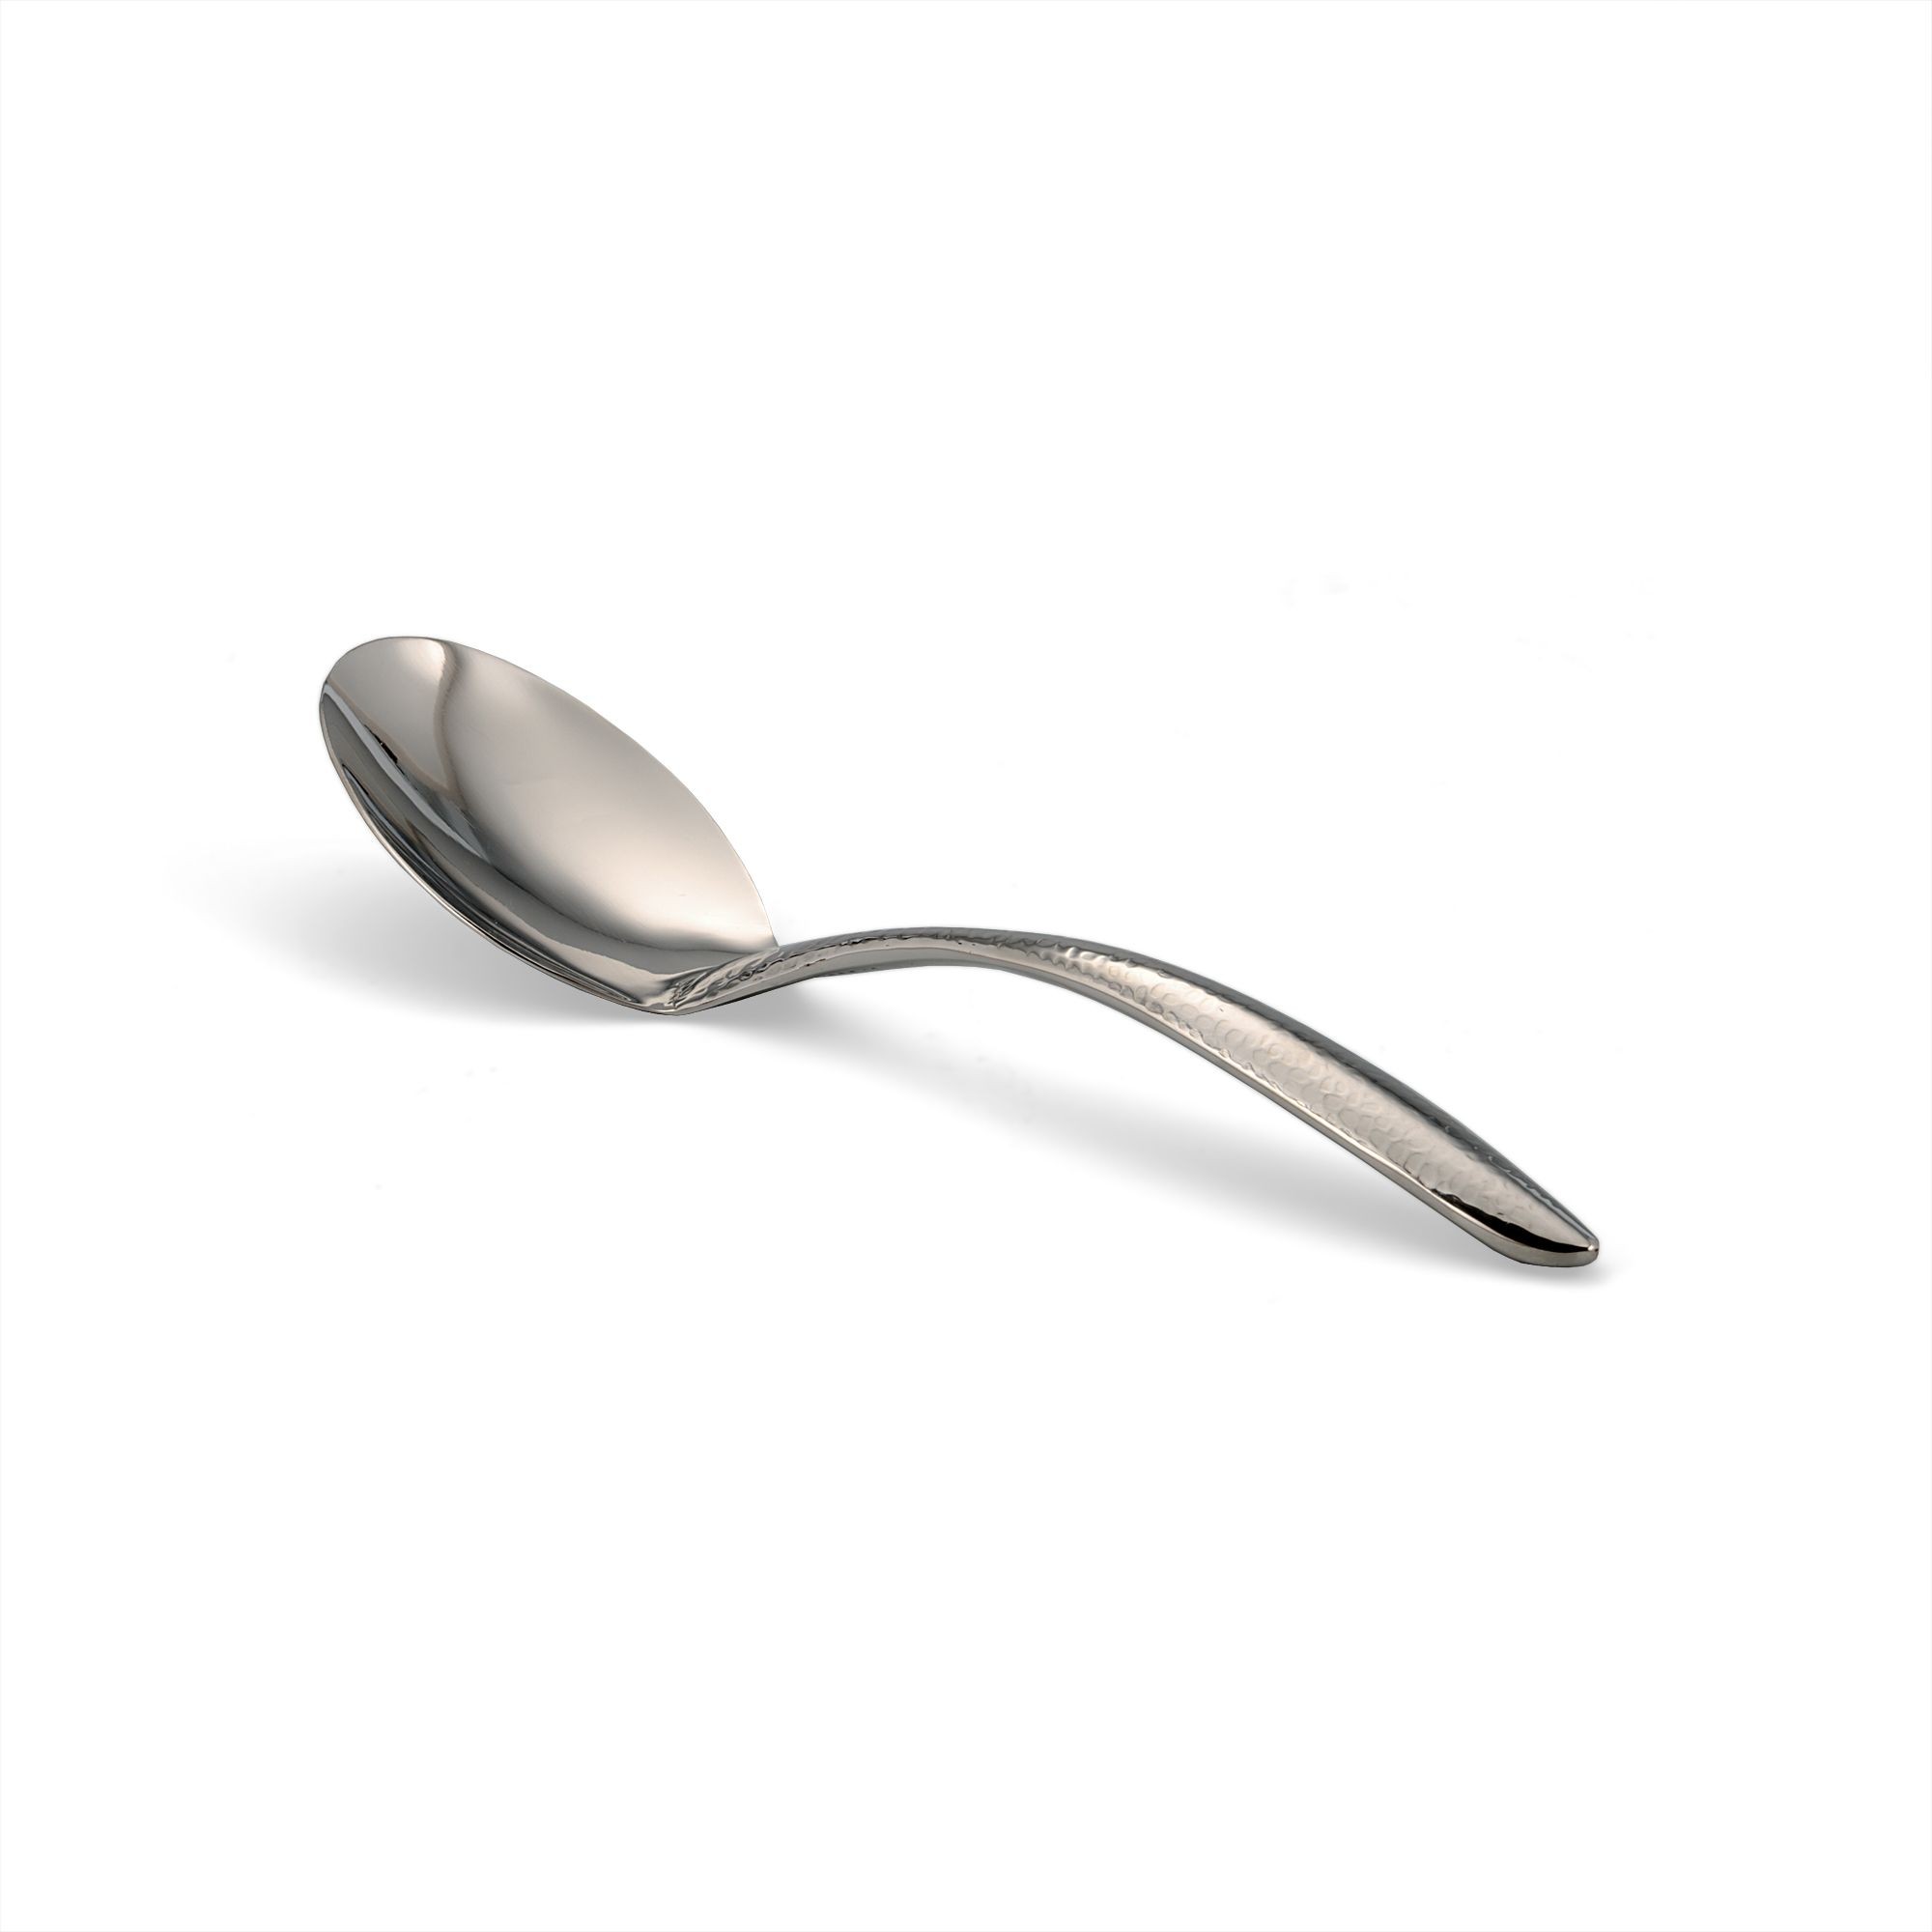 https://www.lionsdeal.com/itempics/Bon-Chef-9643HF-EZ-Use-Banquet-Serving-Solid-Spoon-with-Hammered-Finish--9-3-4-quot--33937_xlarge.jpg